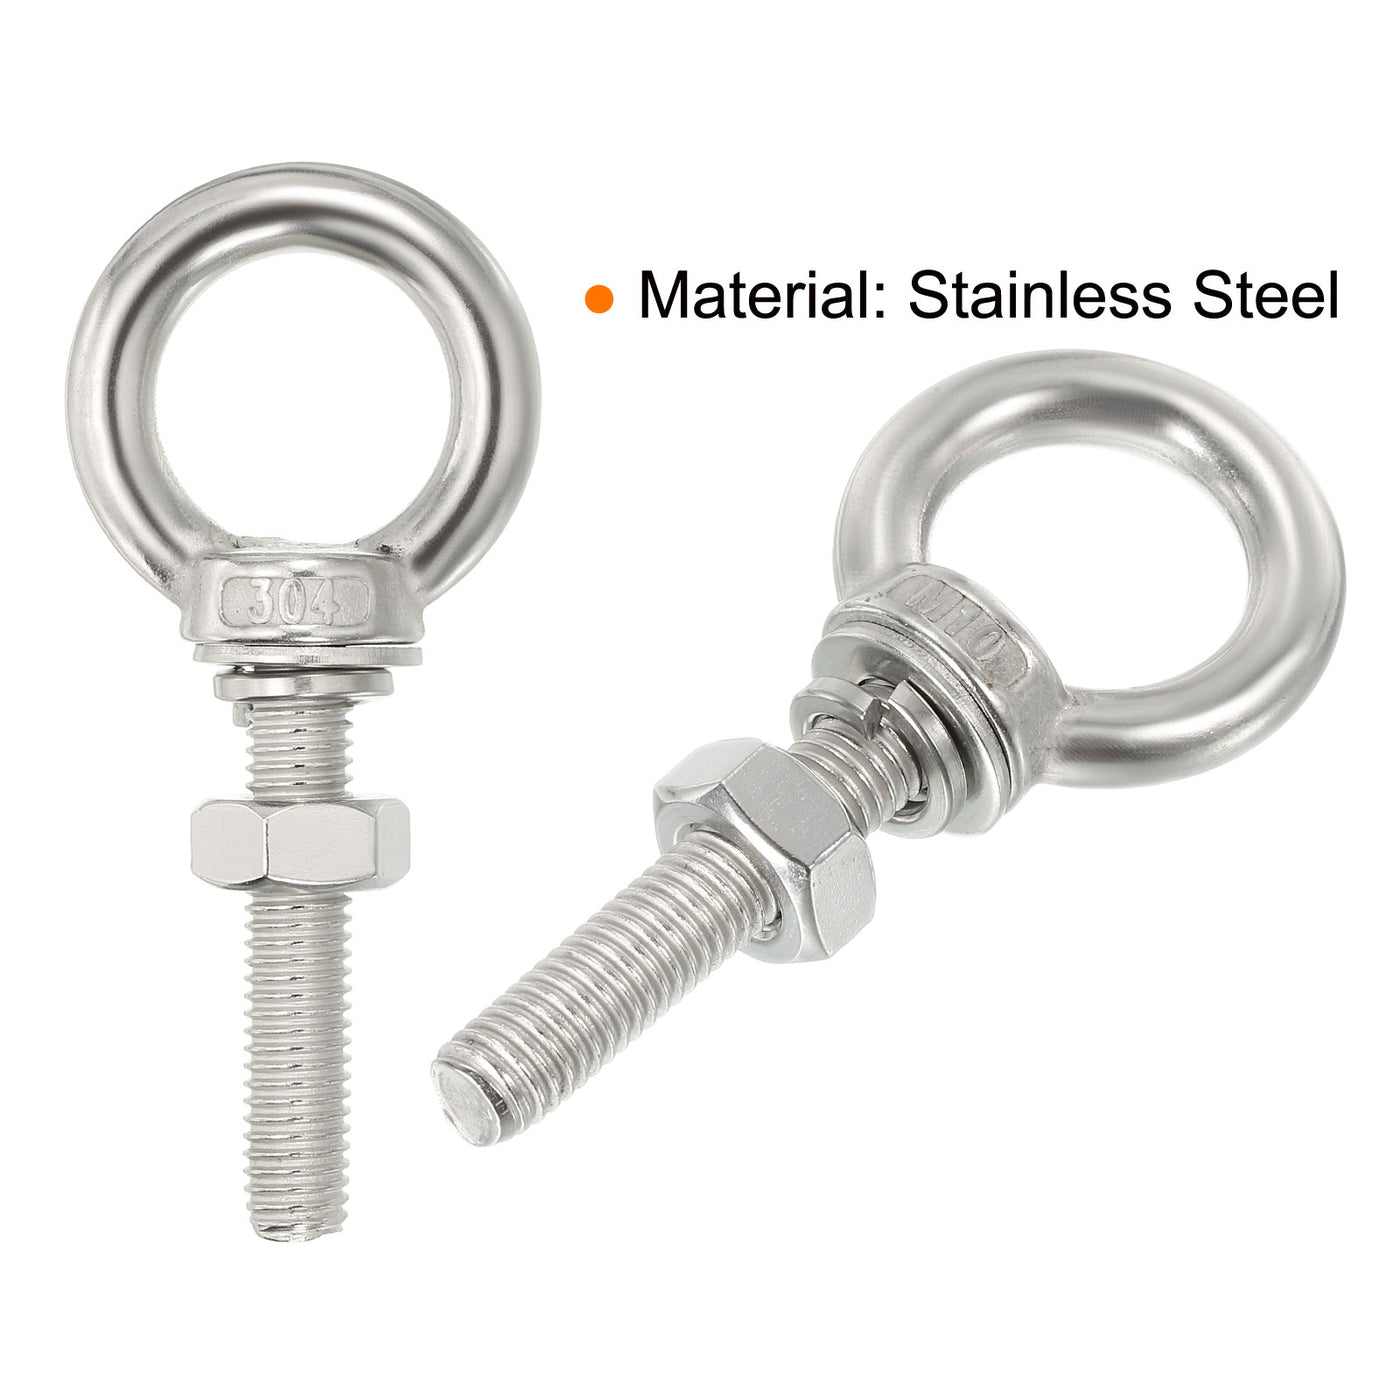 uxcell Uxcell M10x50 3/8"x2" Stainless Steel Eye Bolts Threaded Screw Eyebolt Shoulder Ring with Nuts Washers for Lifting Hanging, 2 Set